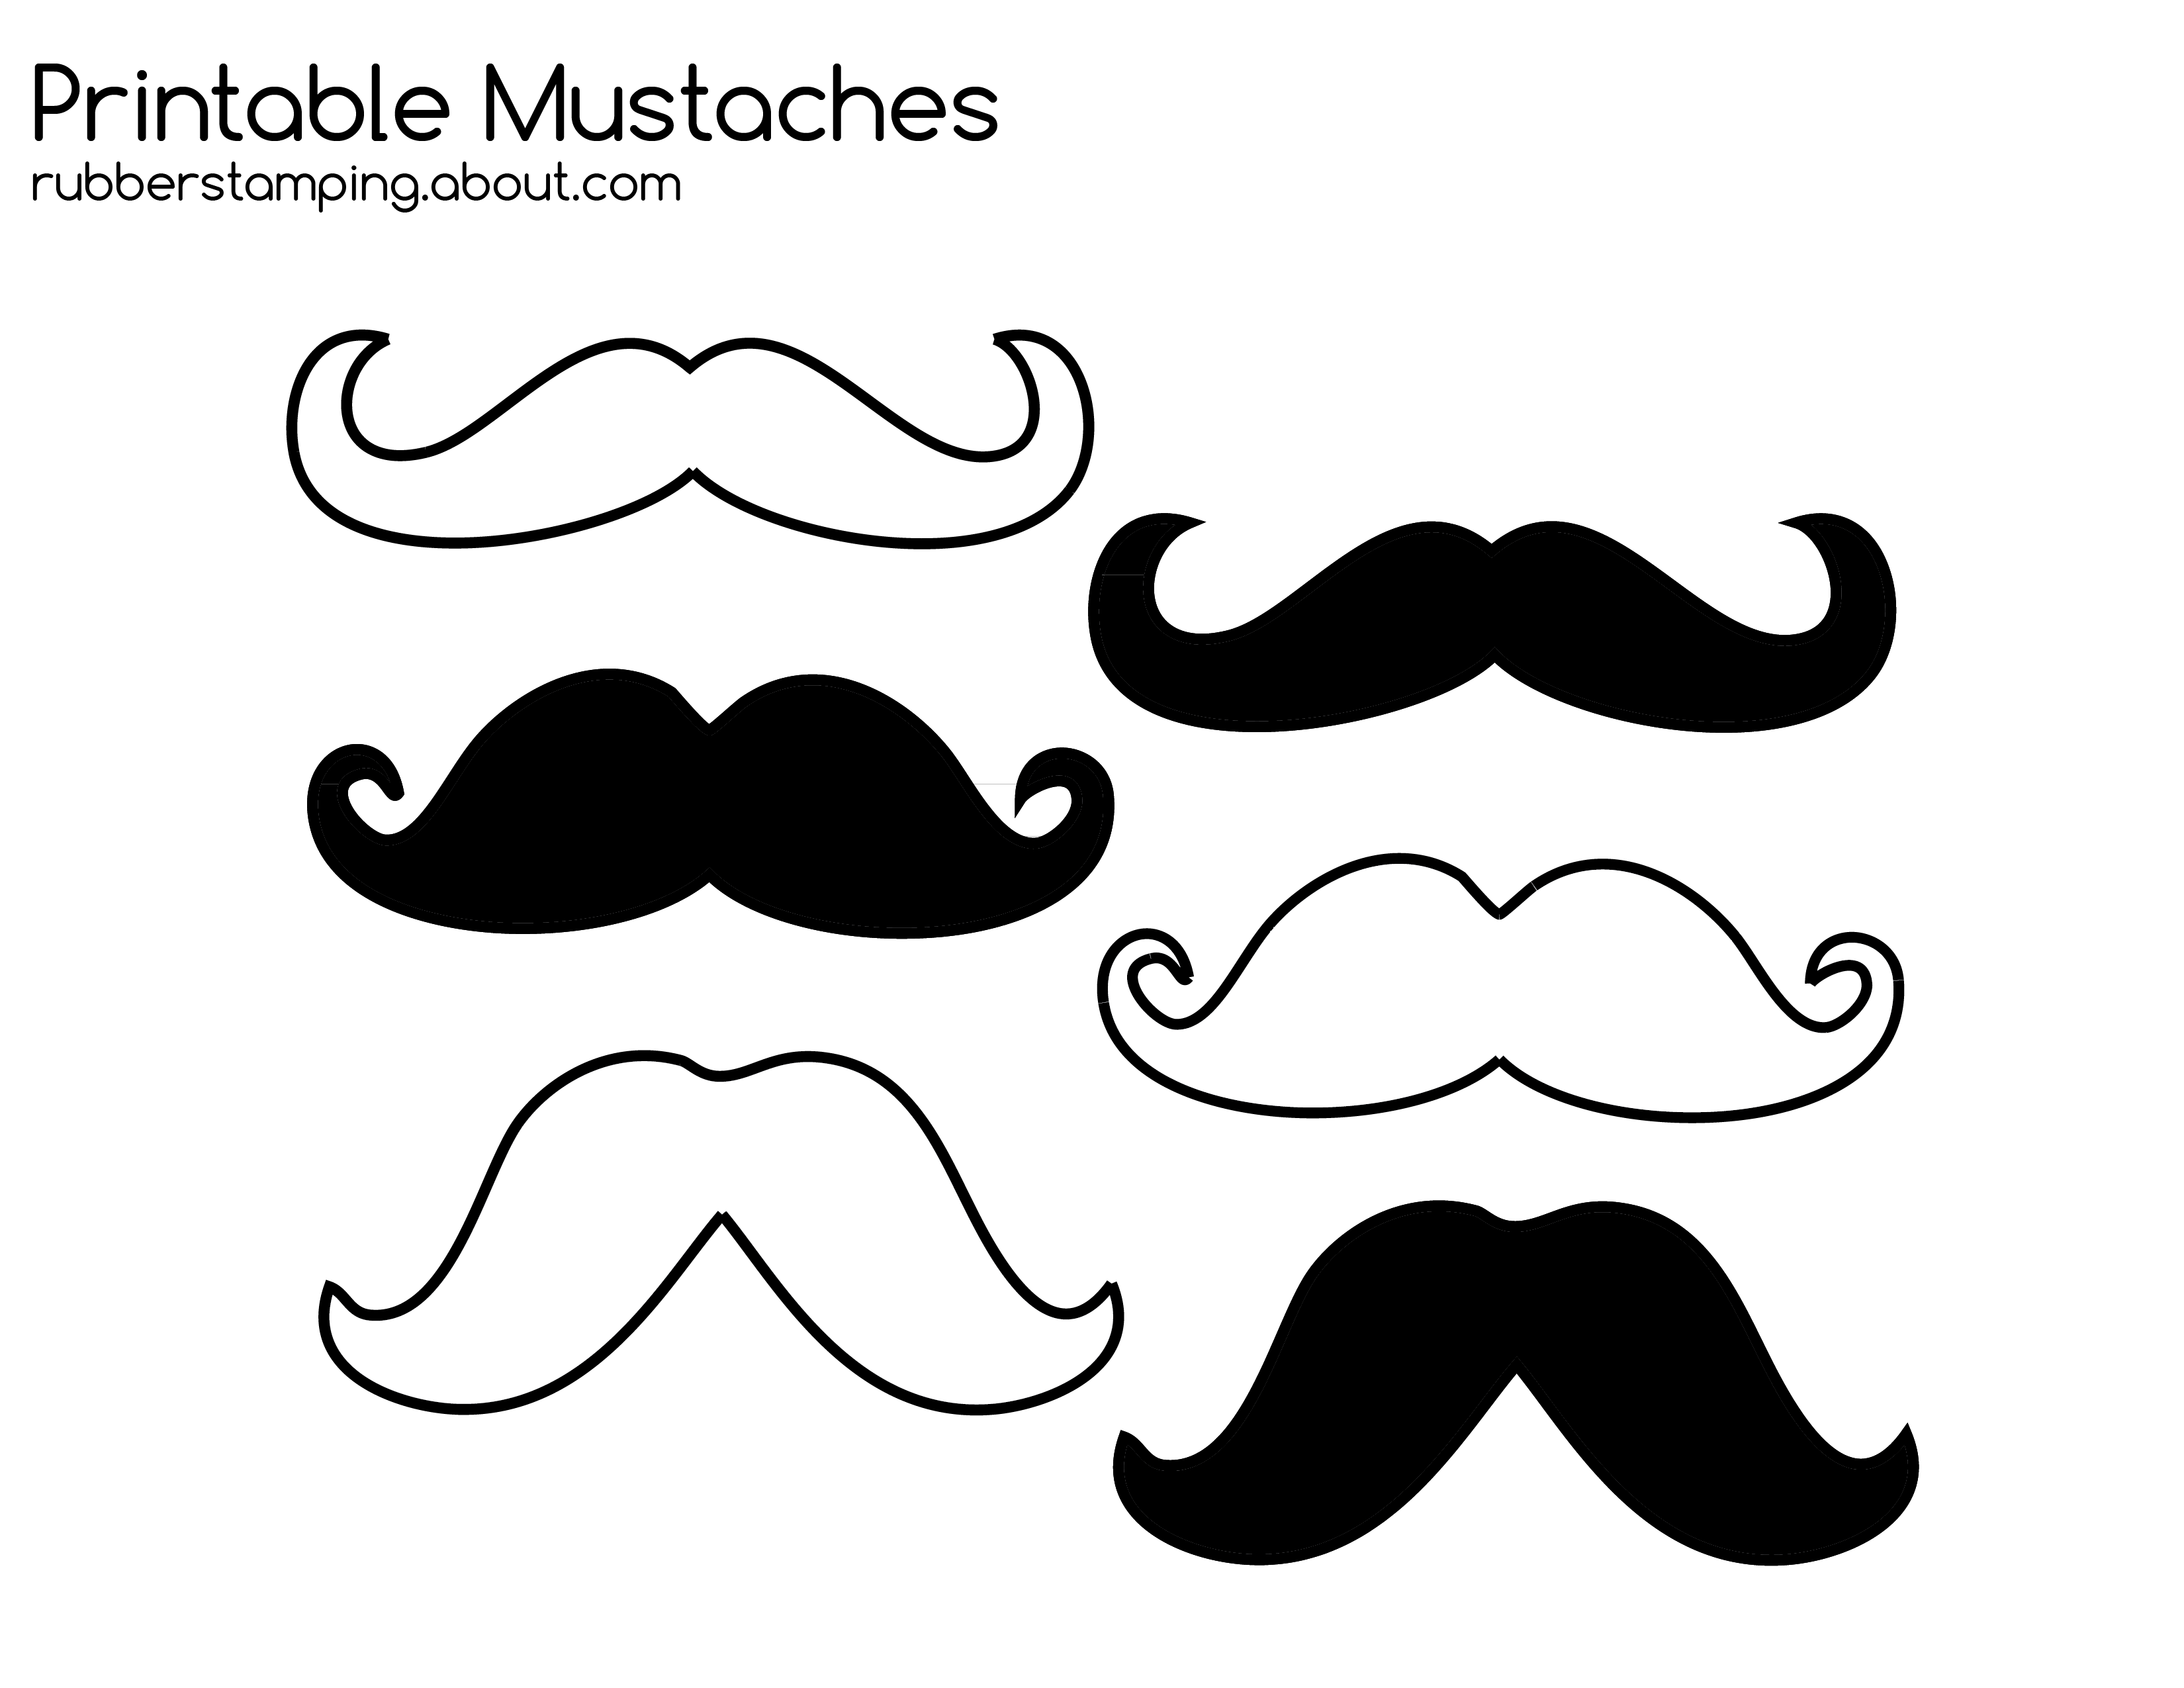 Free printable images for. White clipart mustache